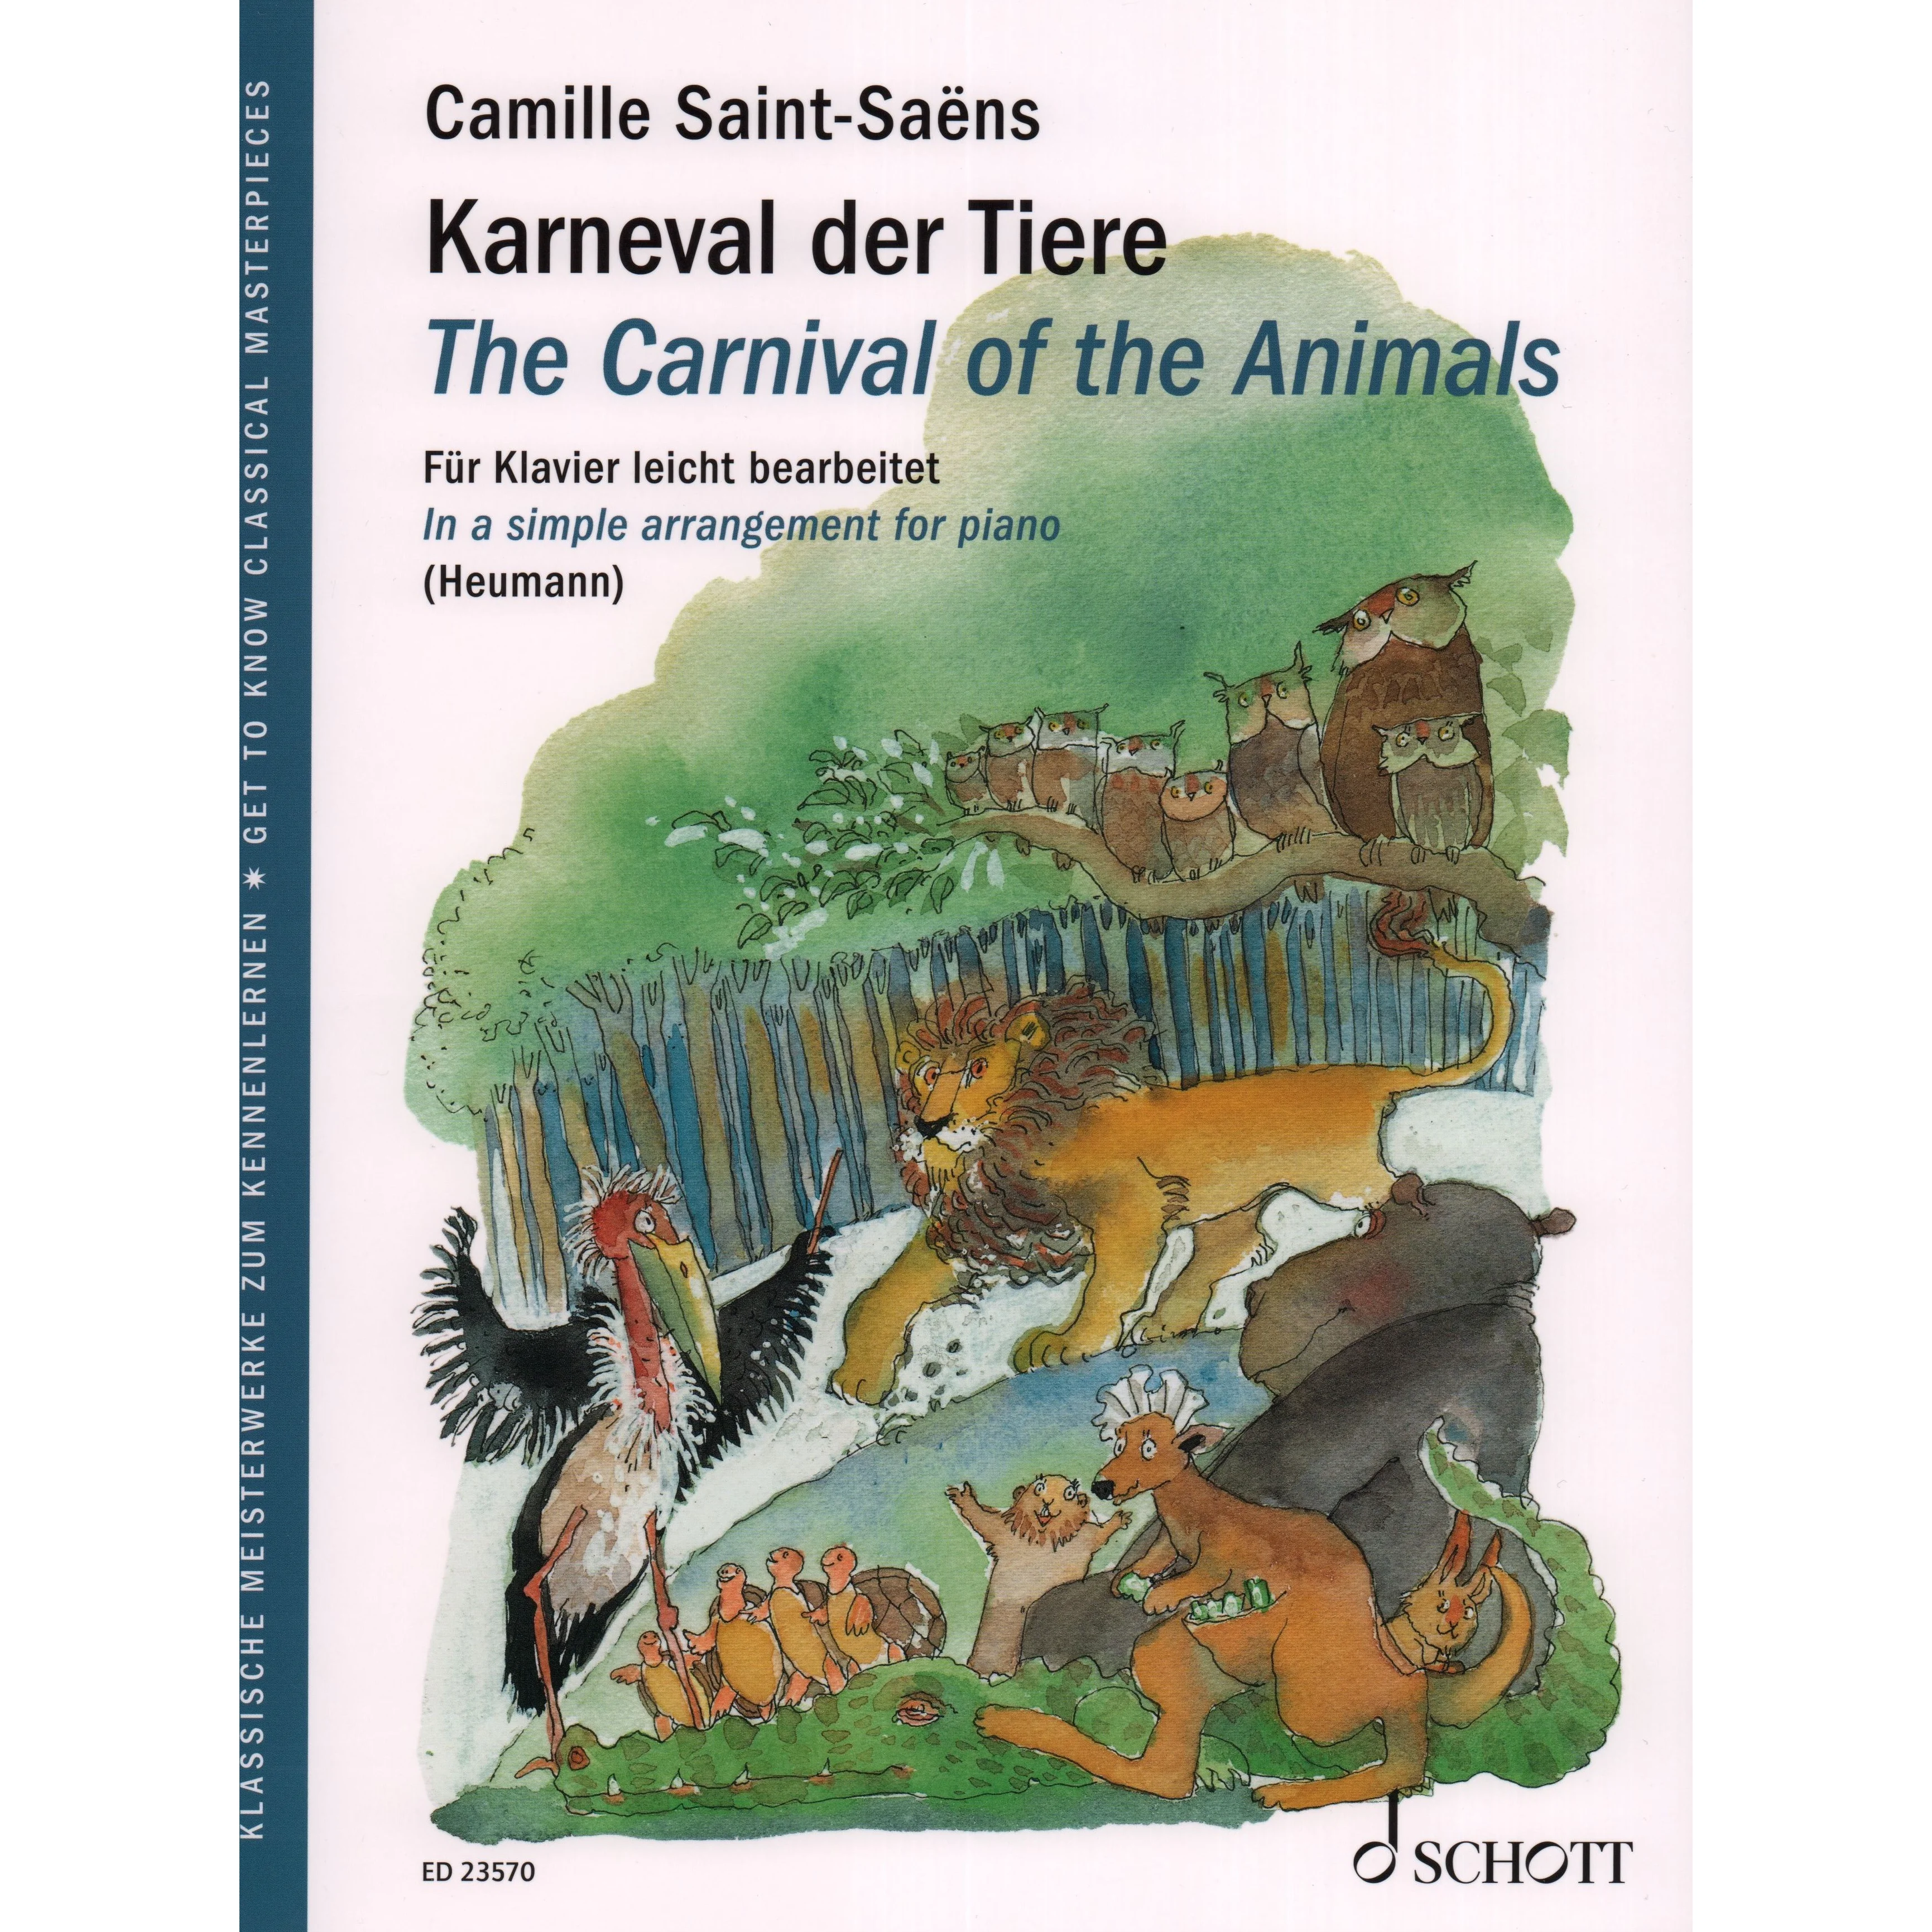 C.　of　The　Piano　Carnival　Animals　Easy　the　for　Flutes　Saint-Saëns.　Just